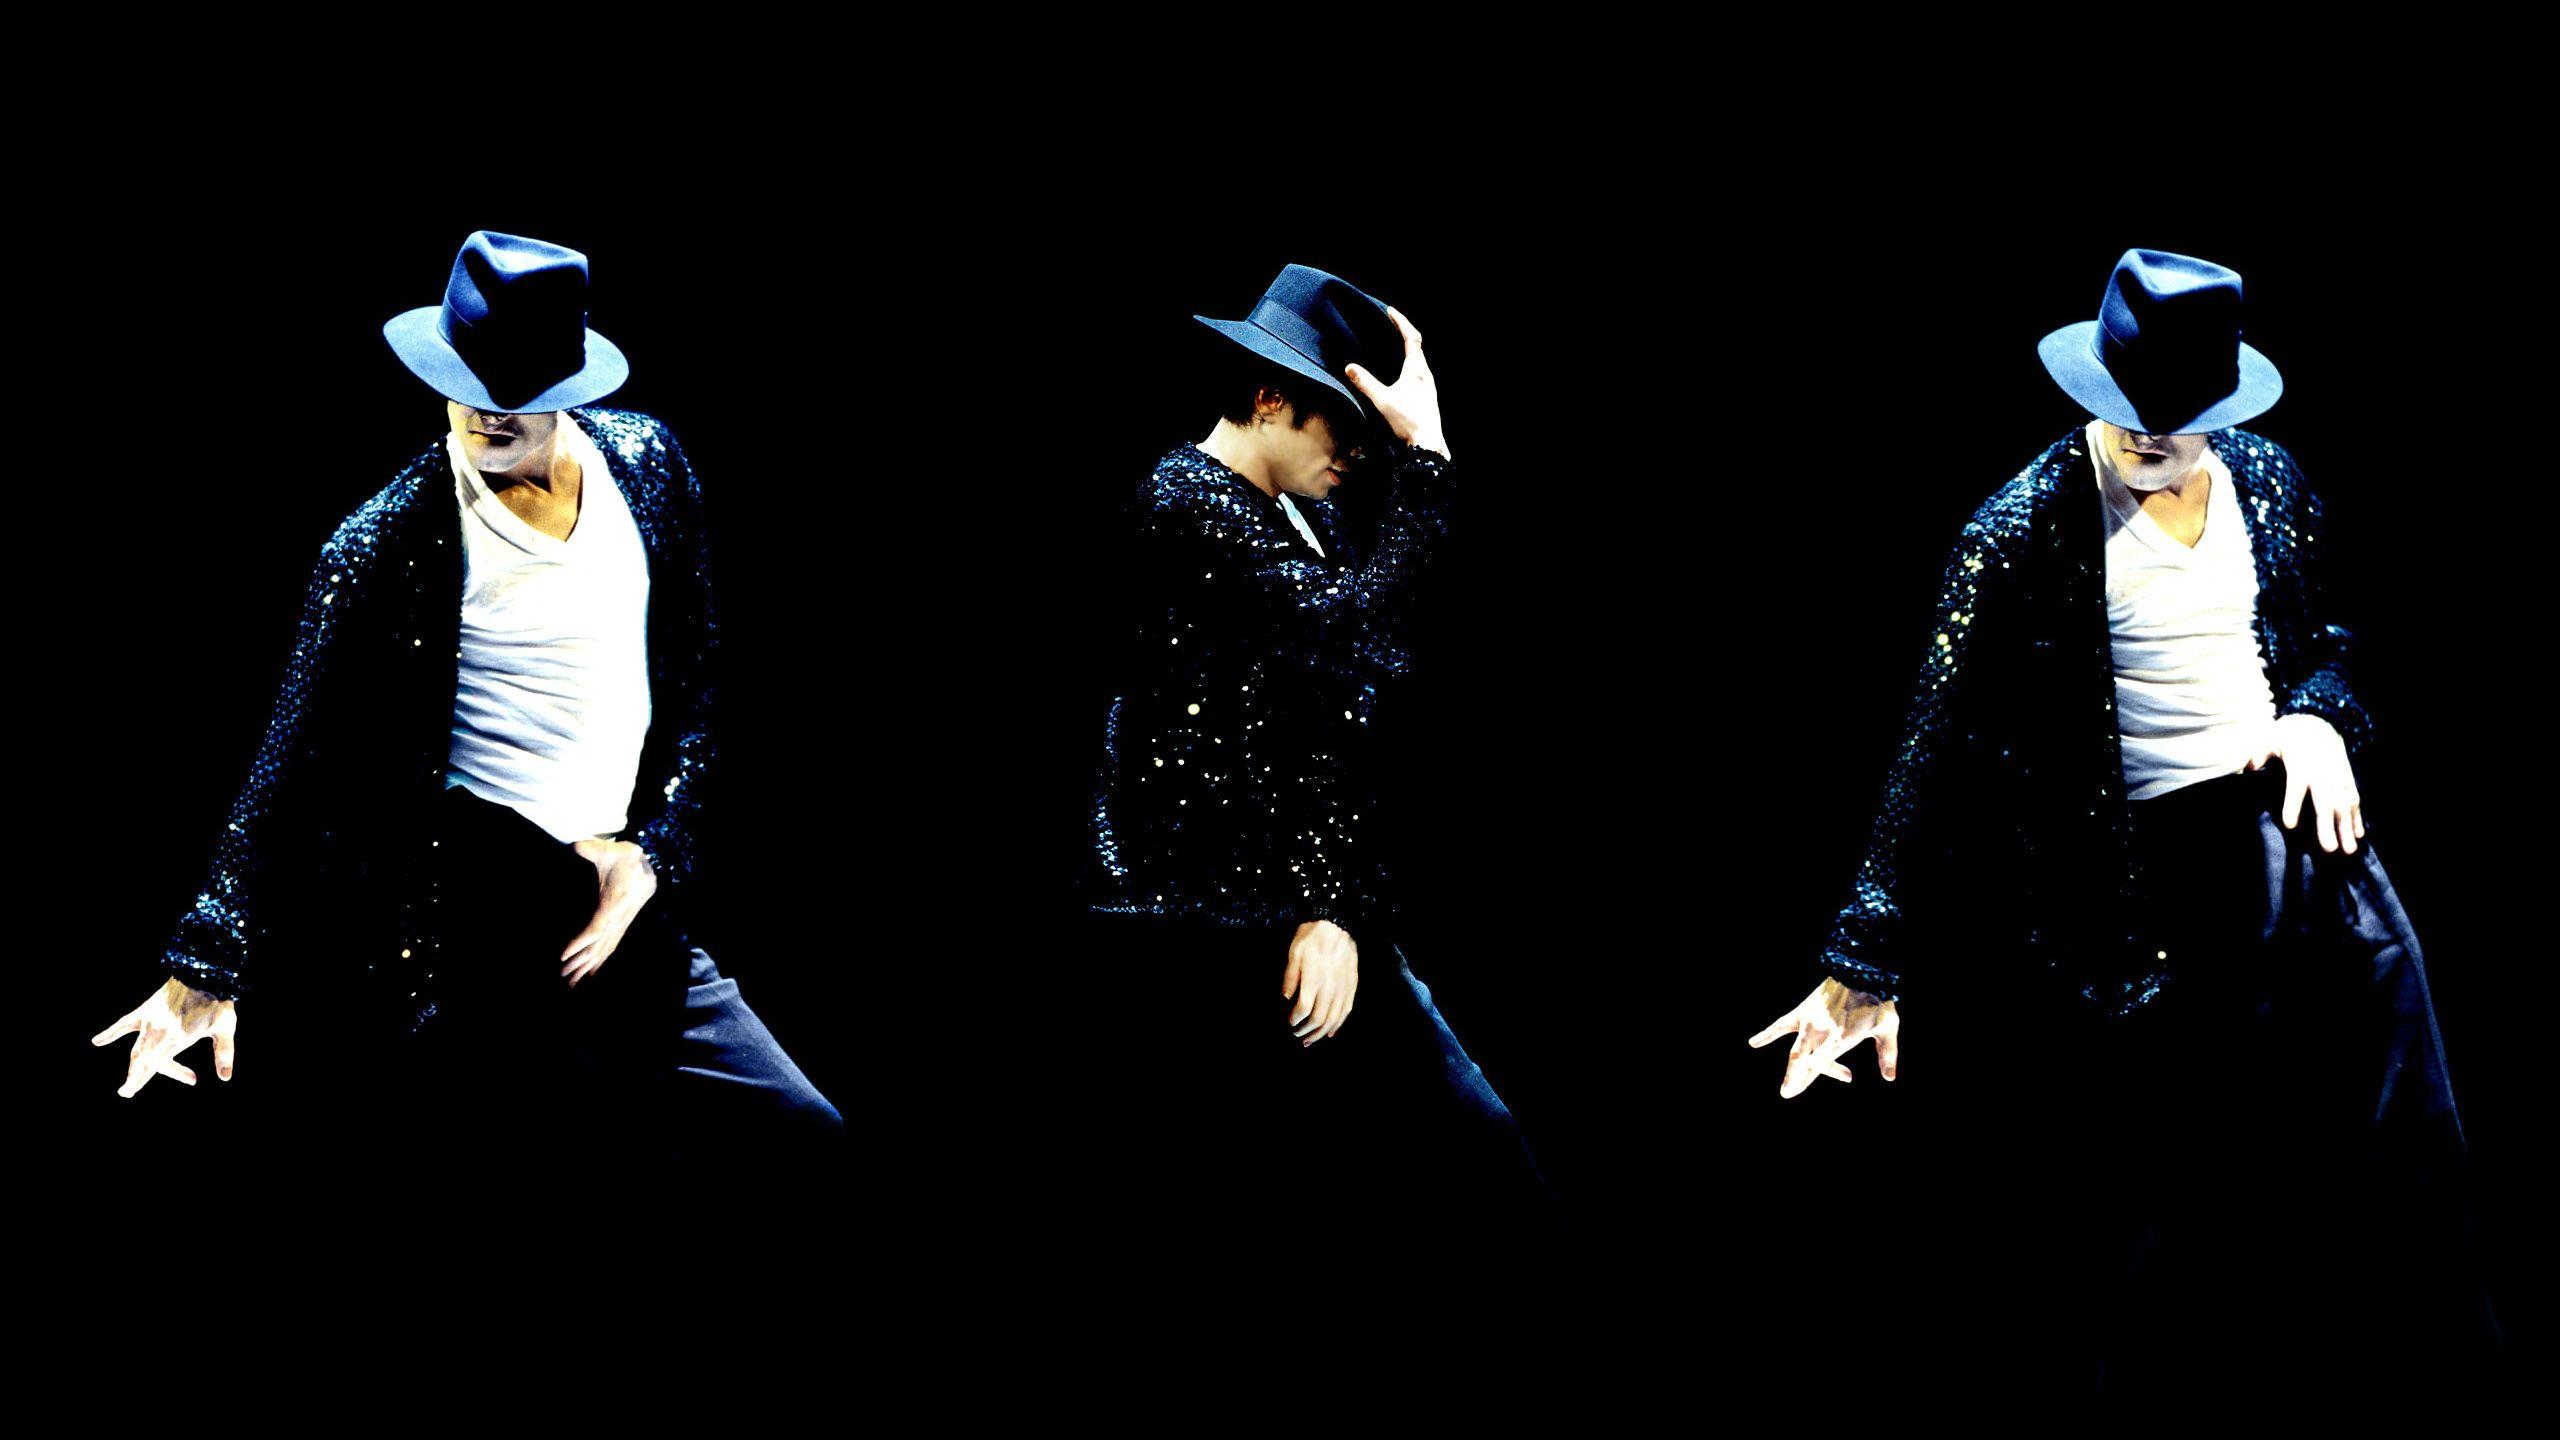 Michael Jackson Full HD Wallpaper and Background Imagex1440